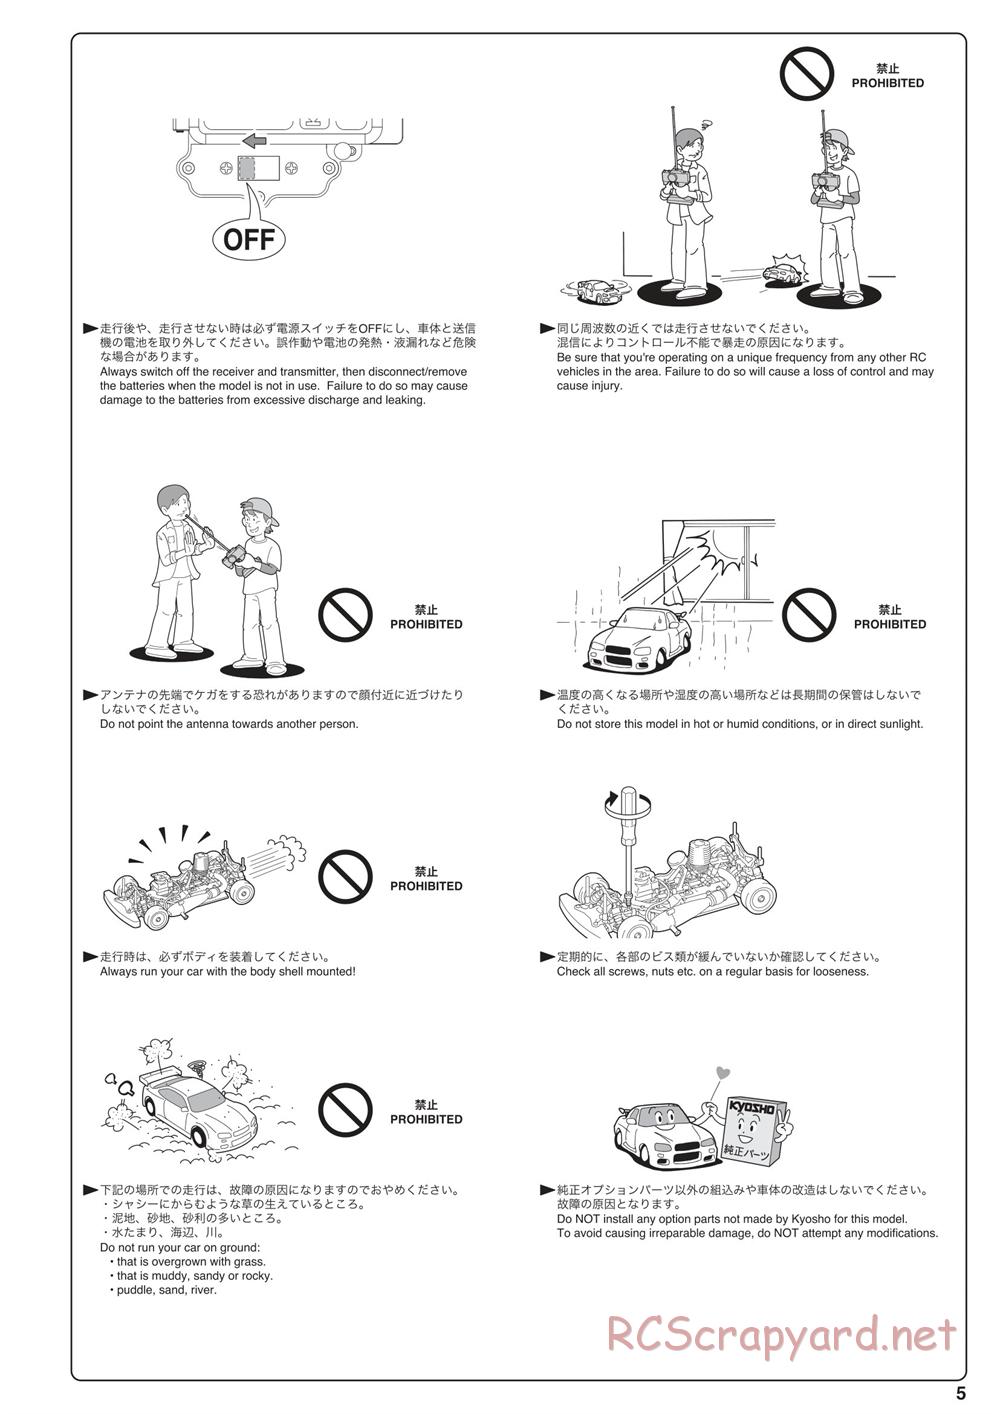 Kyosho - Inferno MP10 - Manual - Page 5